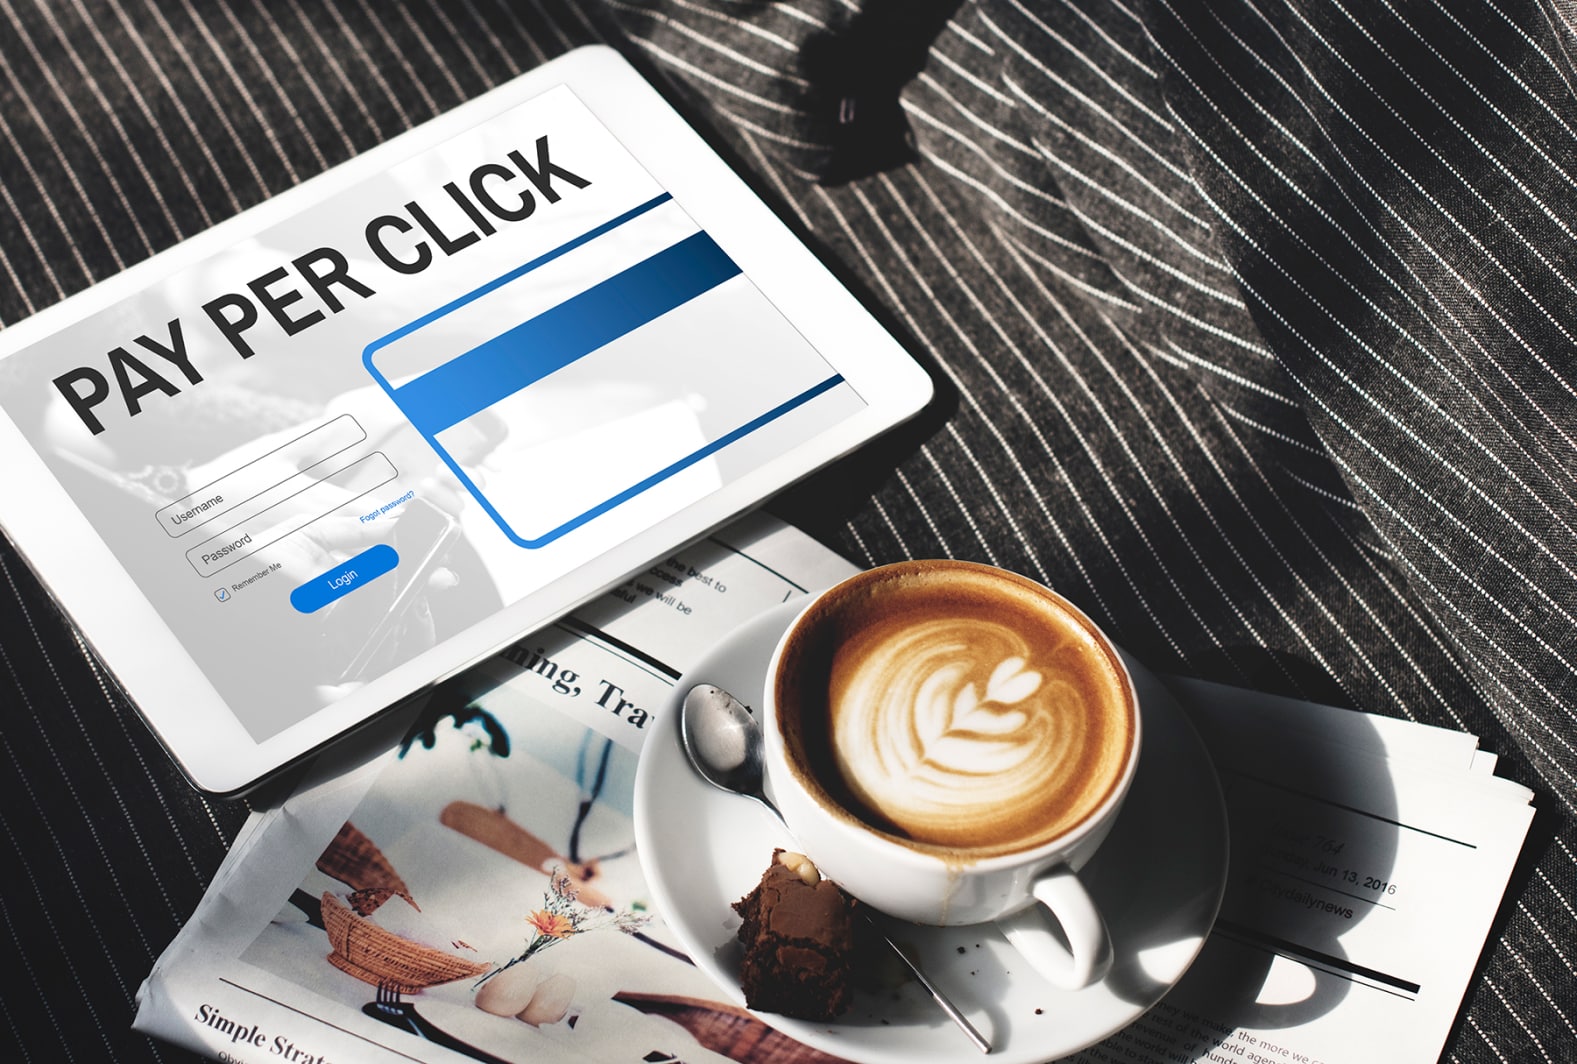 pay-per-click-login-website-payment-graphic-concept-1